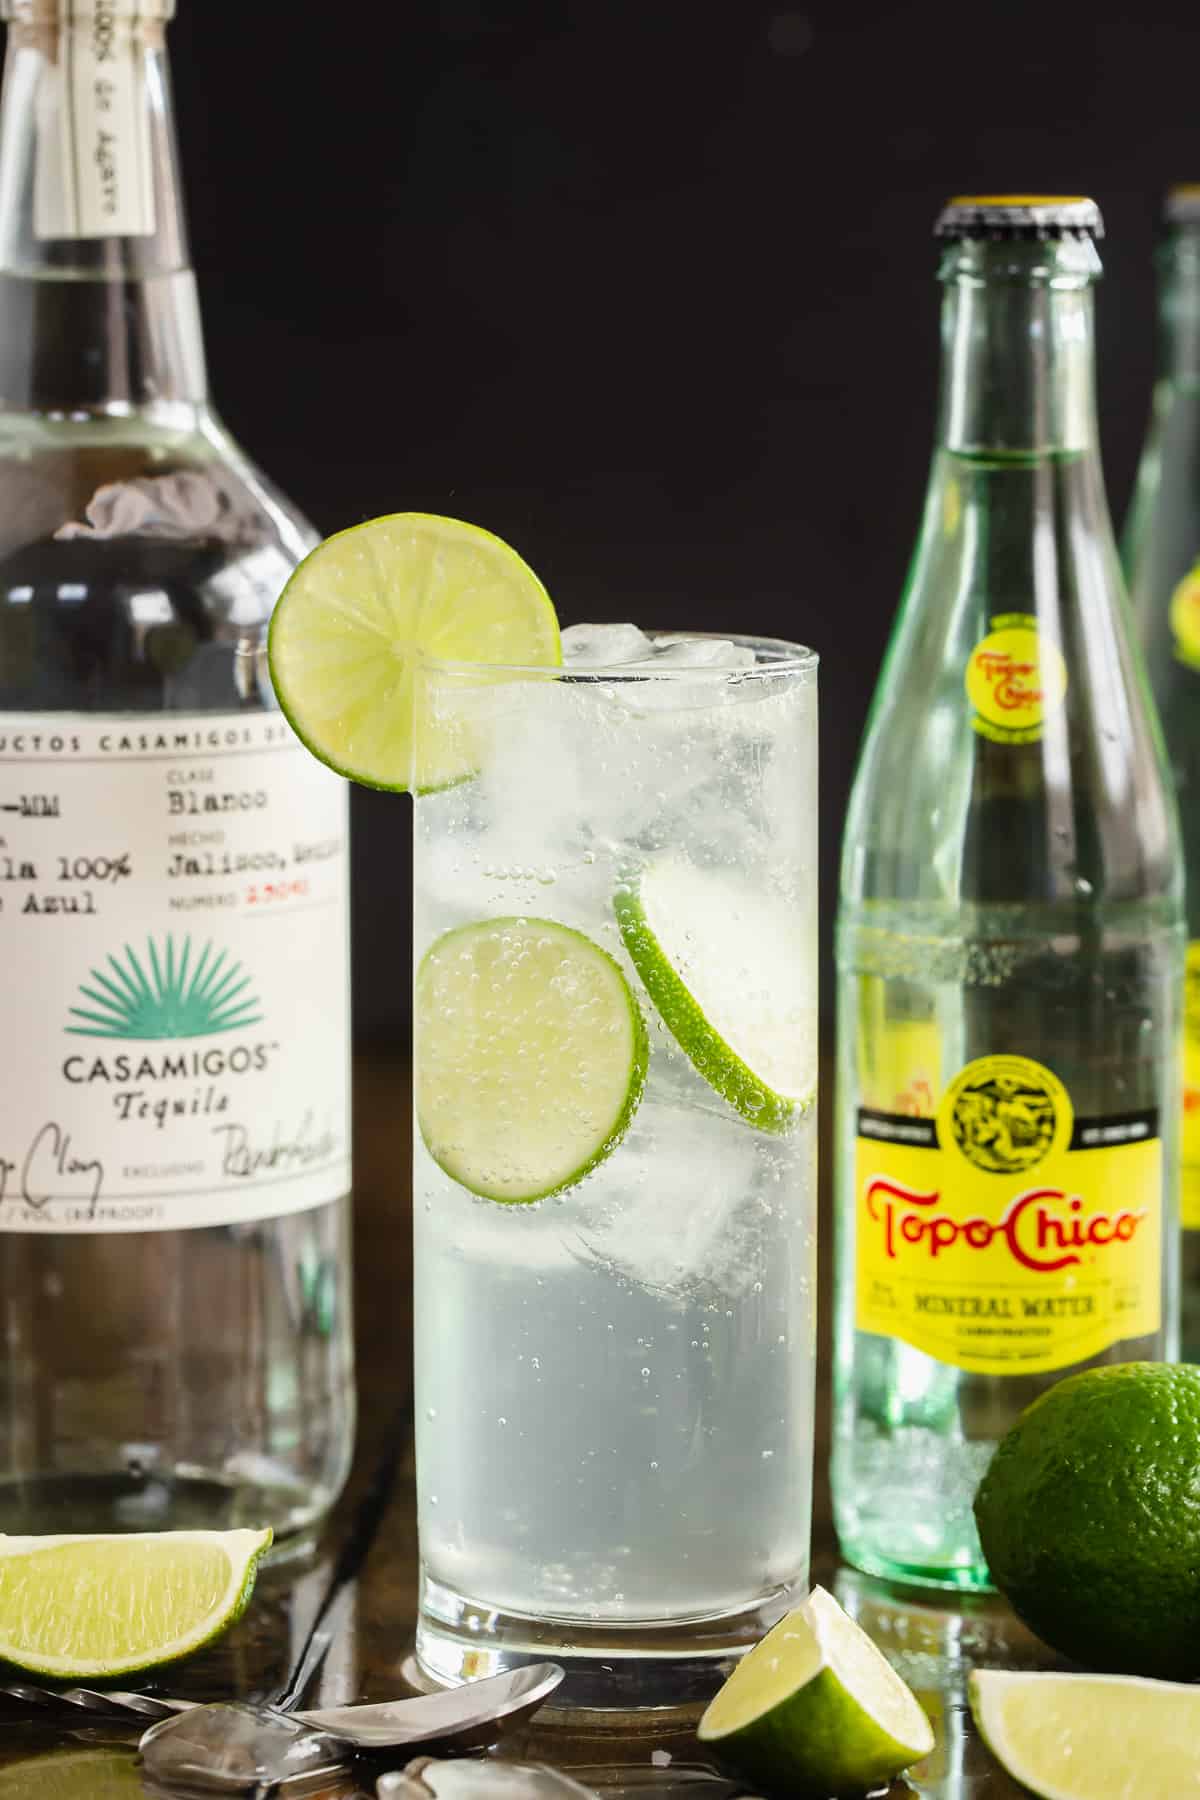 An Ranch Water cocktail in front of a bottle of Casamigos Tequila and Topo Chico Mineral Water.